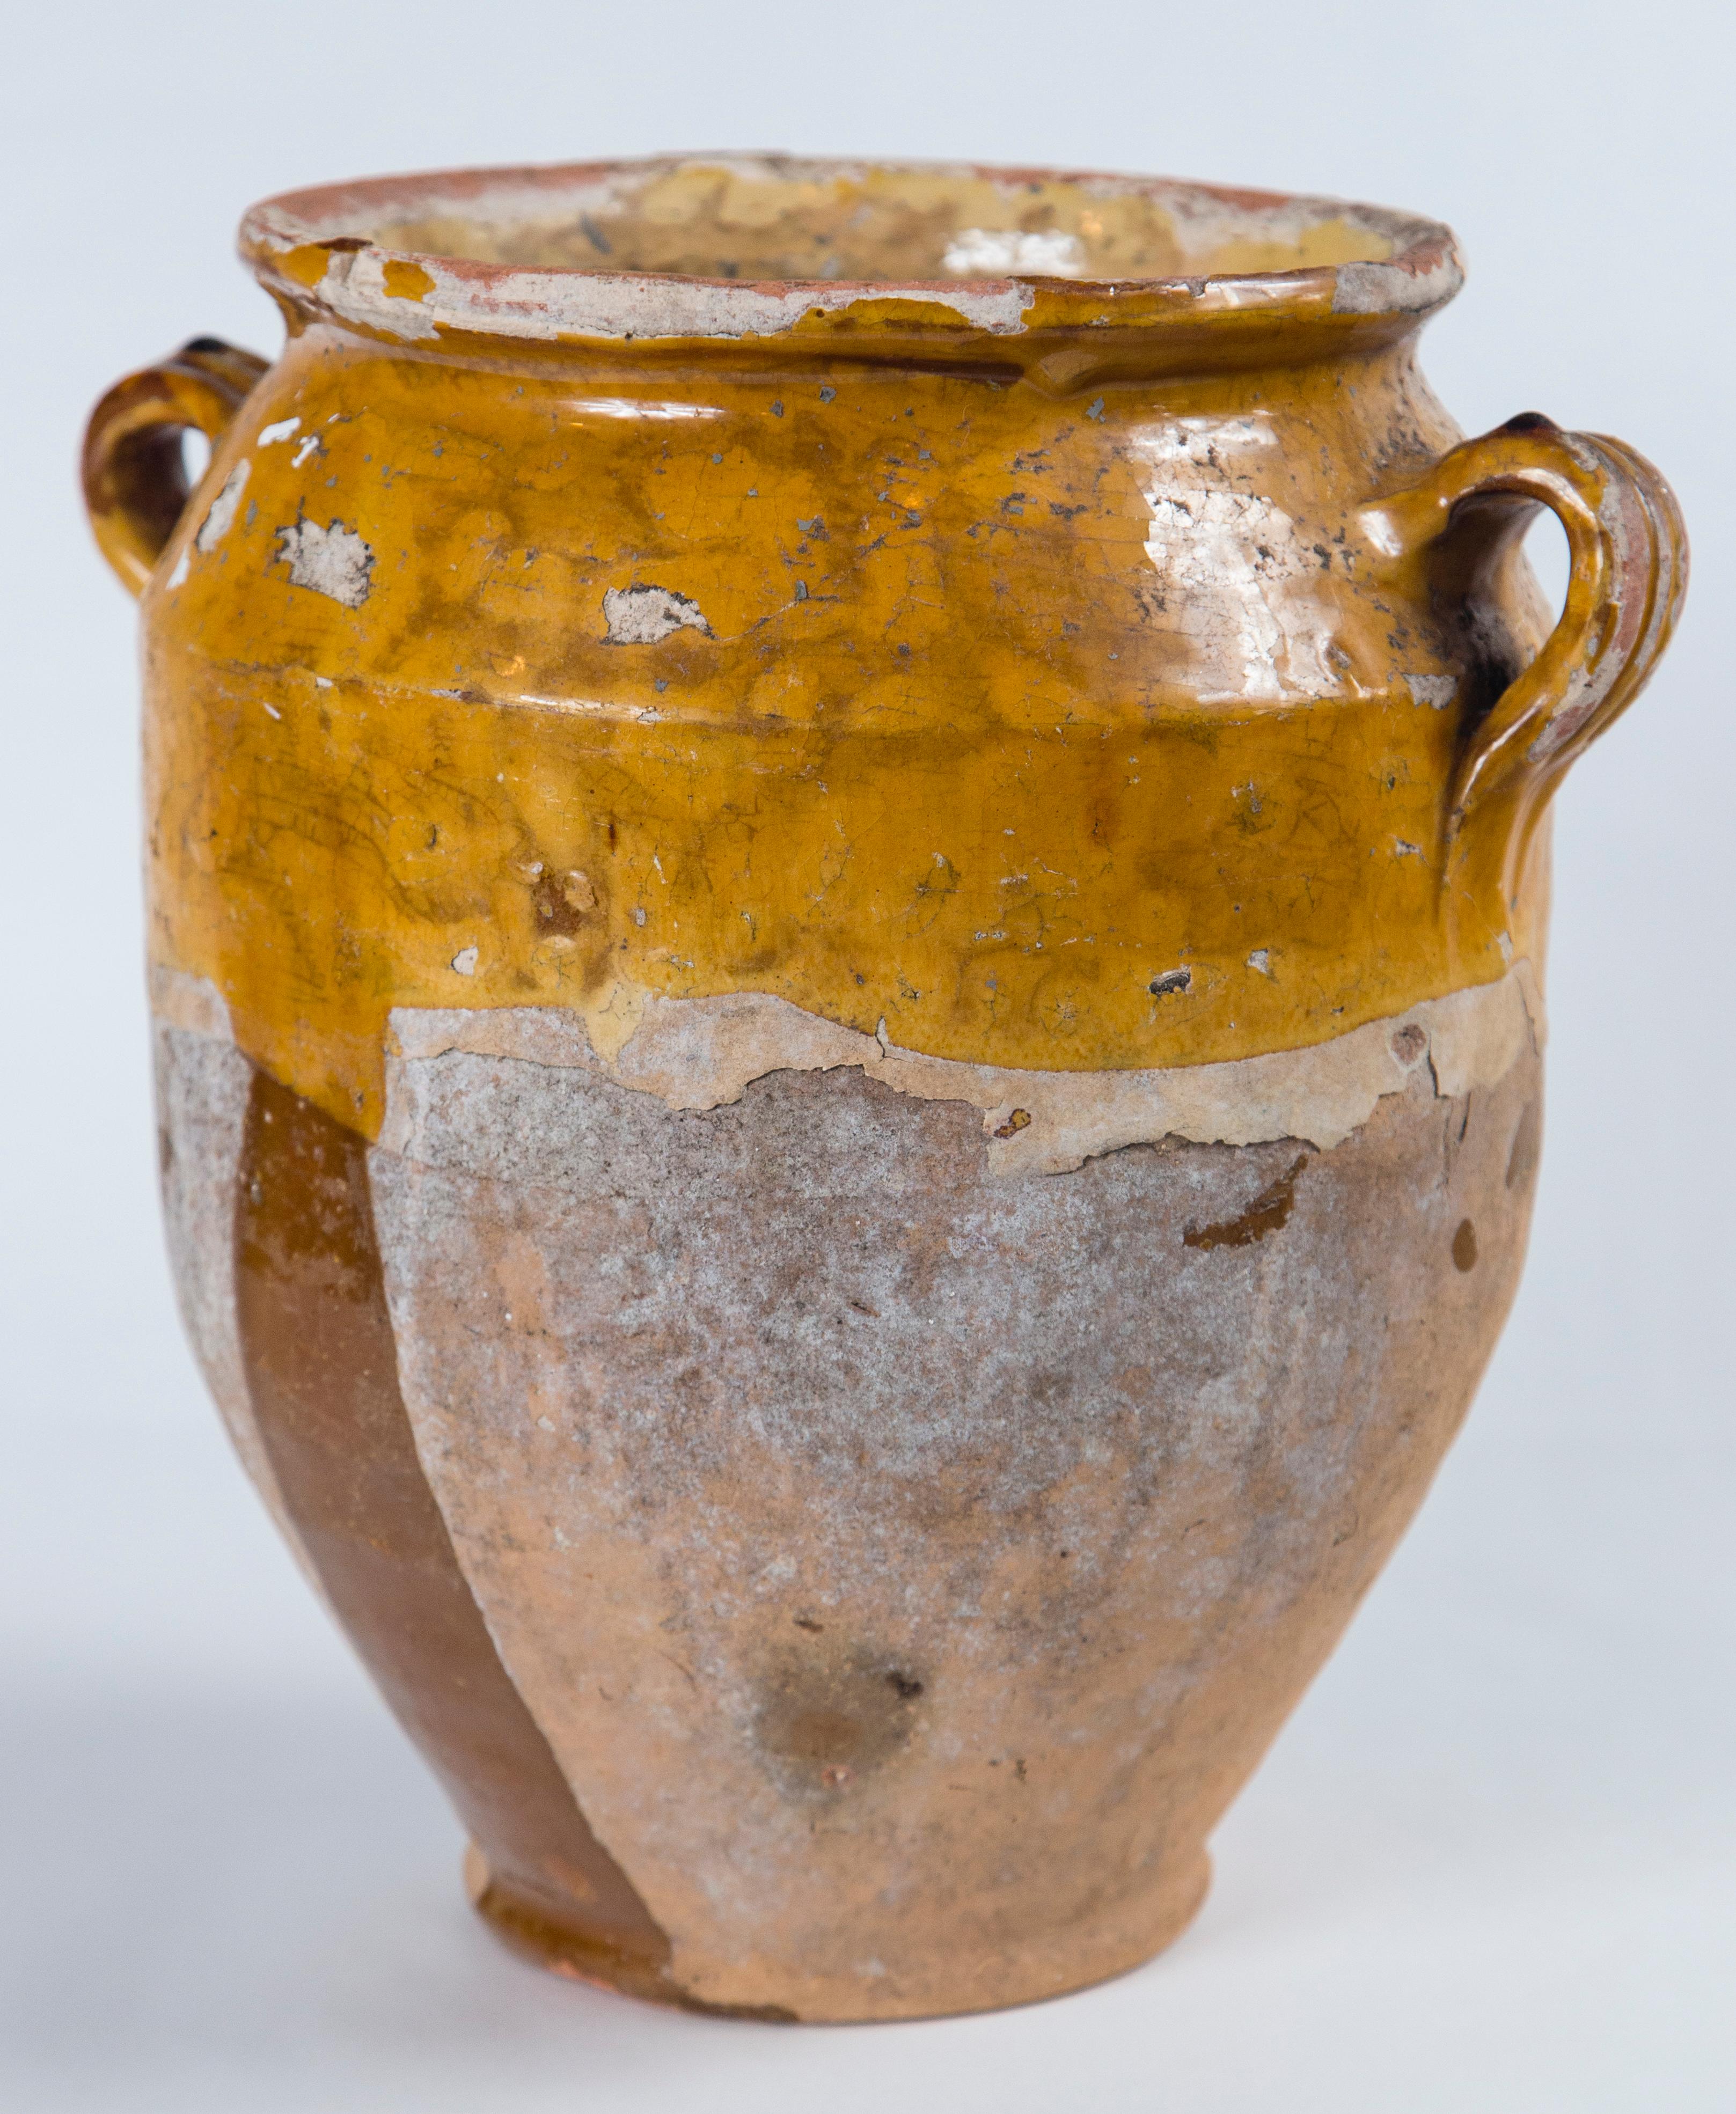 Antique French confit pot, circa 1900. Aged terra cotta with yellow glaze. Confit pots were used for food preservation. The bottom half was left unglazed to allow the pot to keep cool while half buried in the ground.